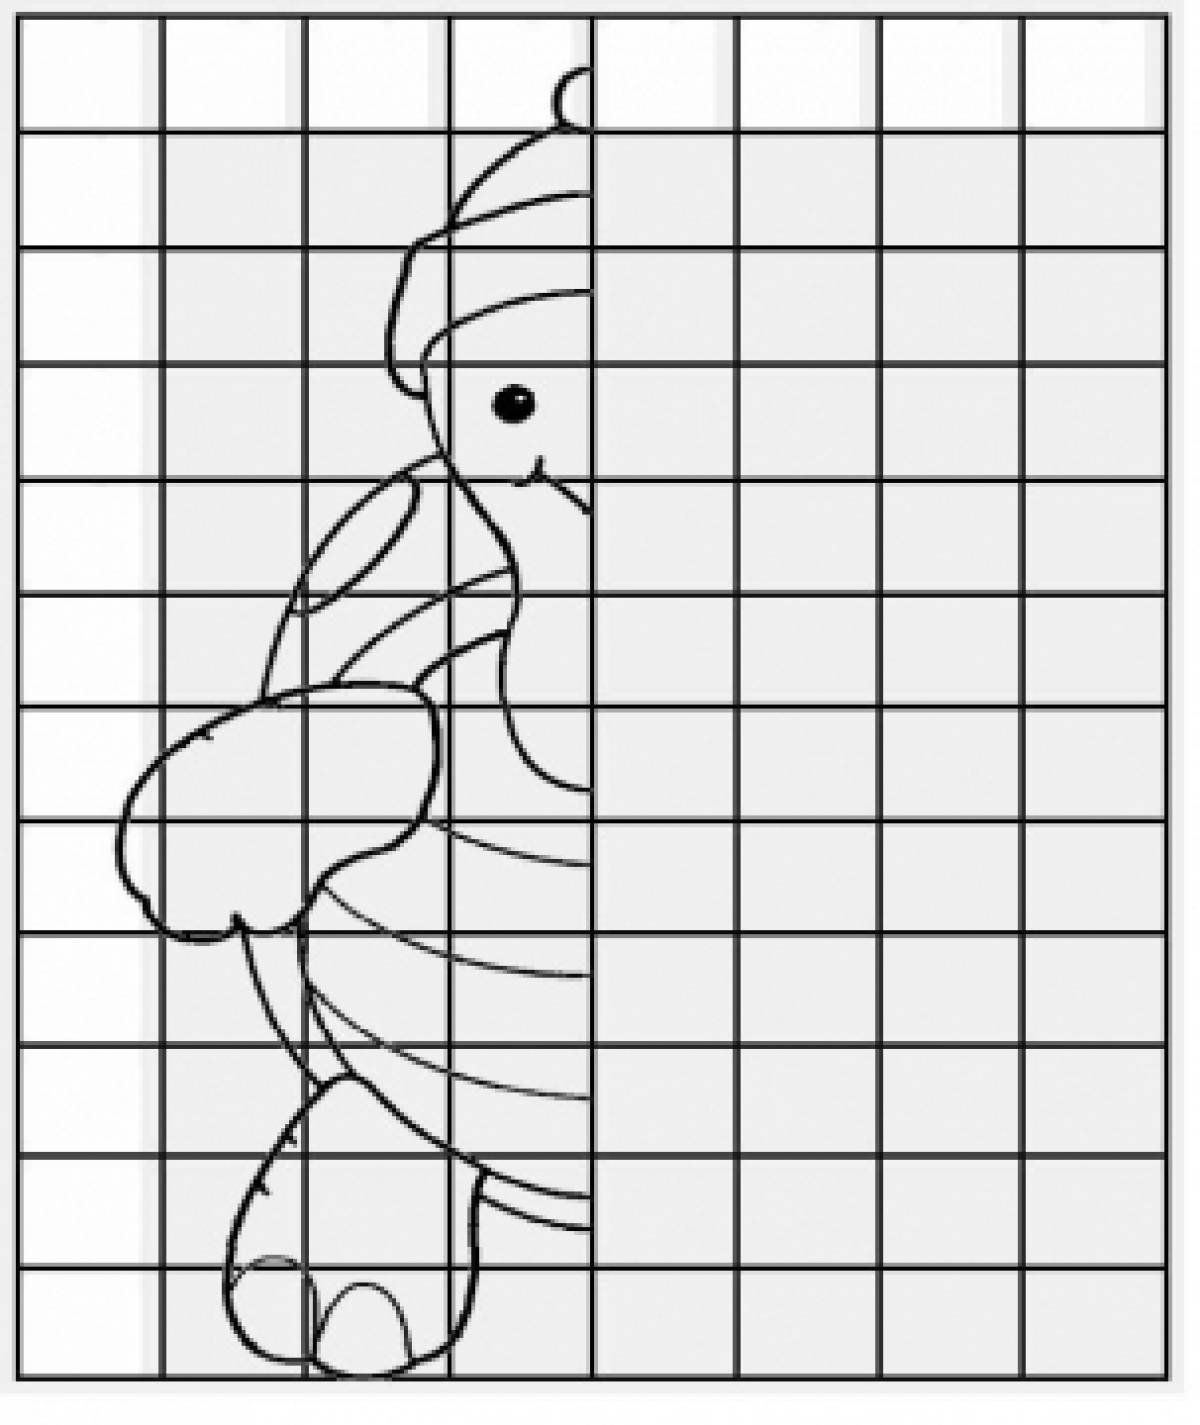 Draw a turtle in the cells